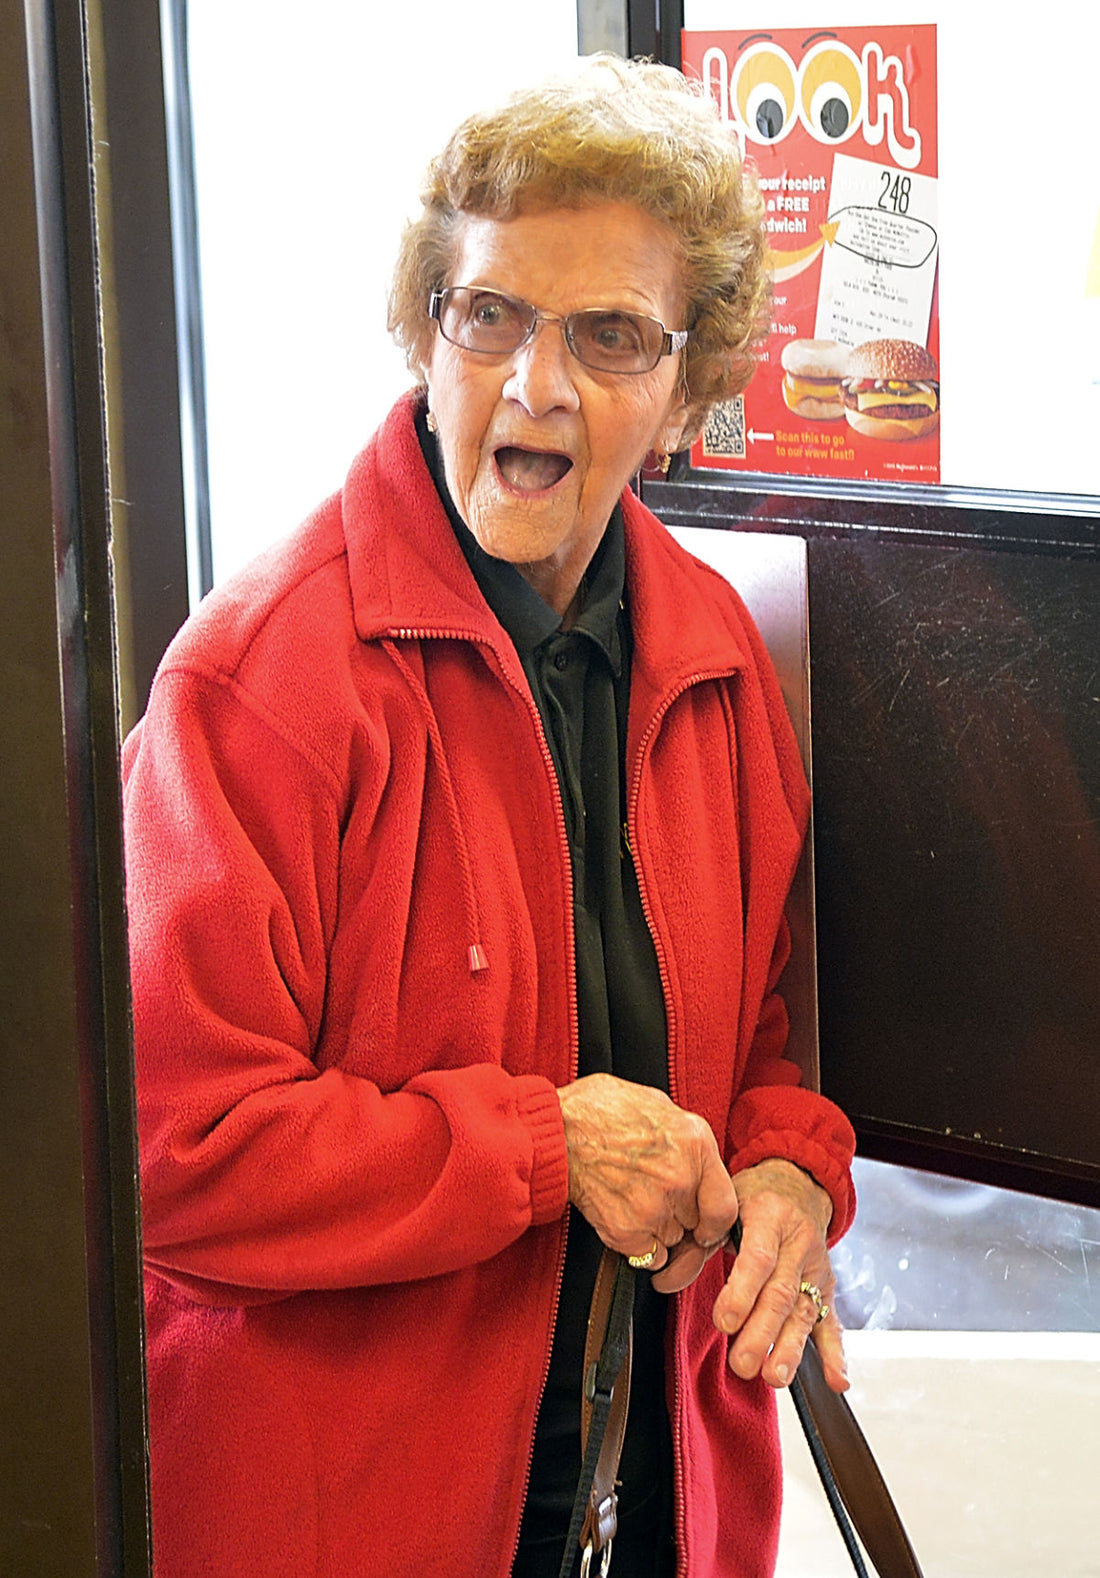 McDonald's Treated A 95-Year-Old Woman (Video)||McDonald's Treated A 95-Year-Old Woman (Video)